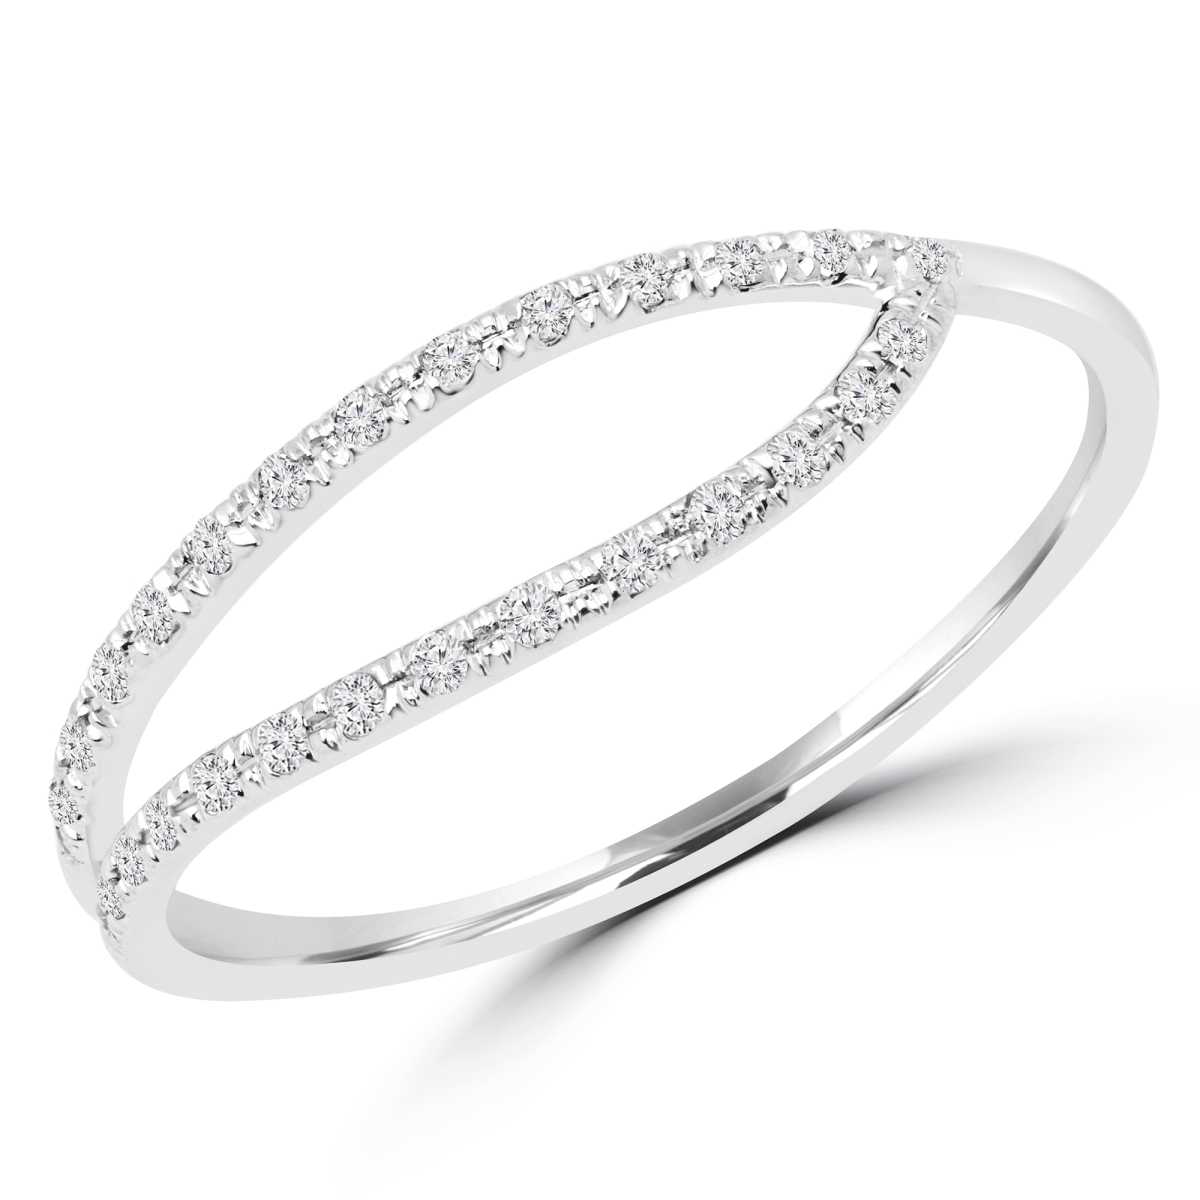 Picture of Majesty Diamonds MDR170056-3.5 0.1 CTW Round Diamond Cocktail Ring in 14K White Gold - Size 3.5